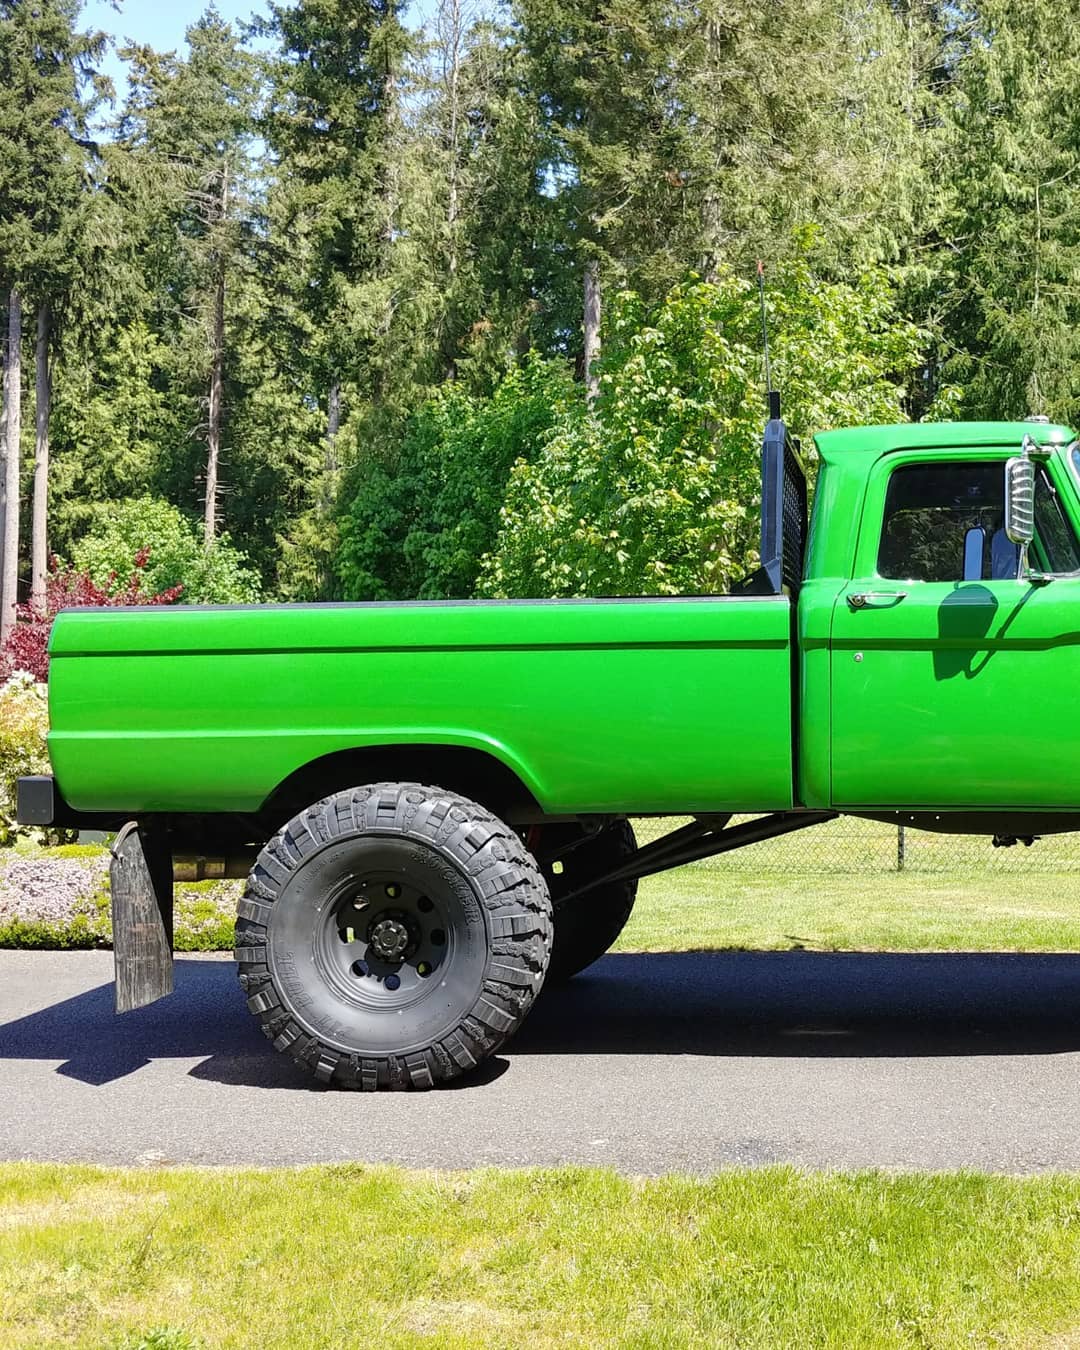 1965 Ford F-100 With a 64 Grill - ( Video ) 6.jpg